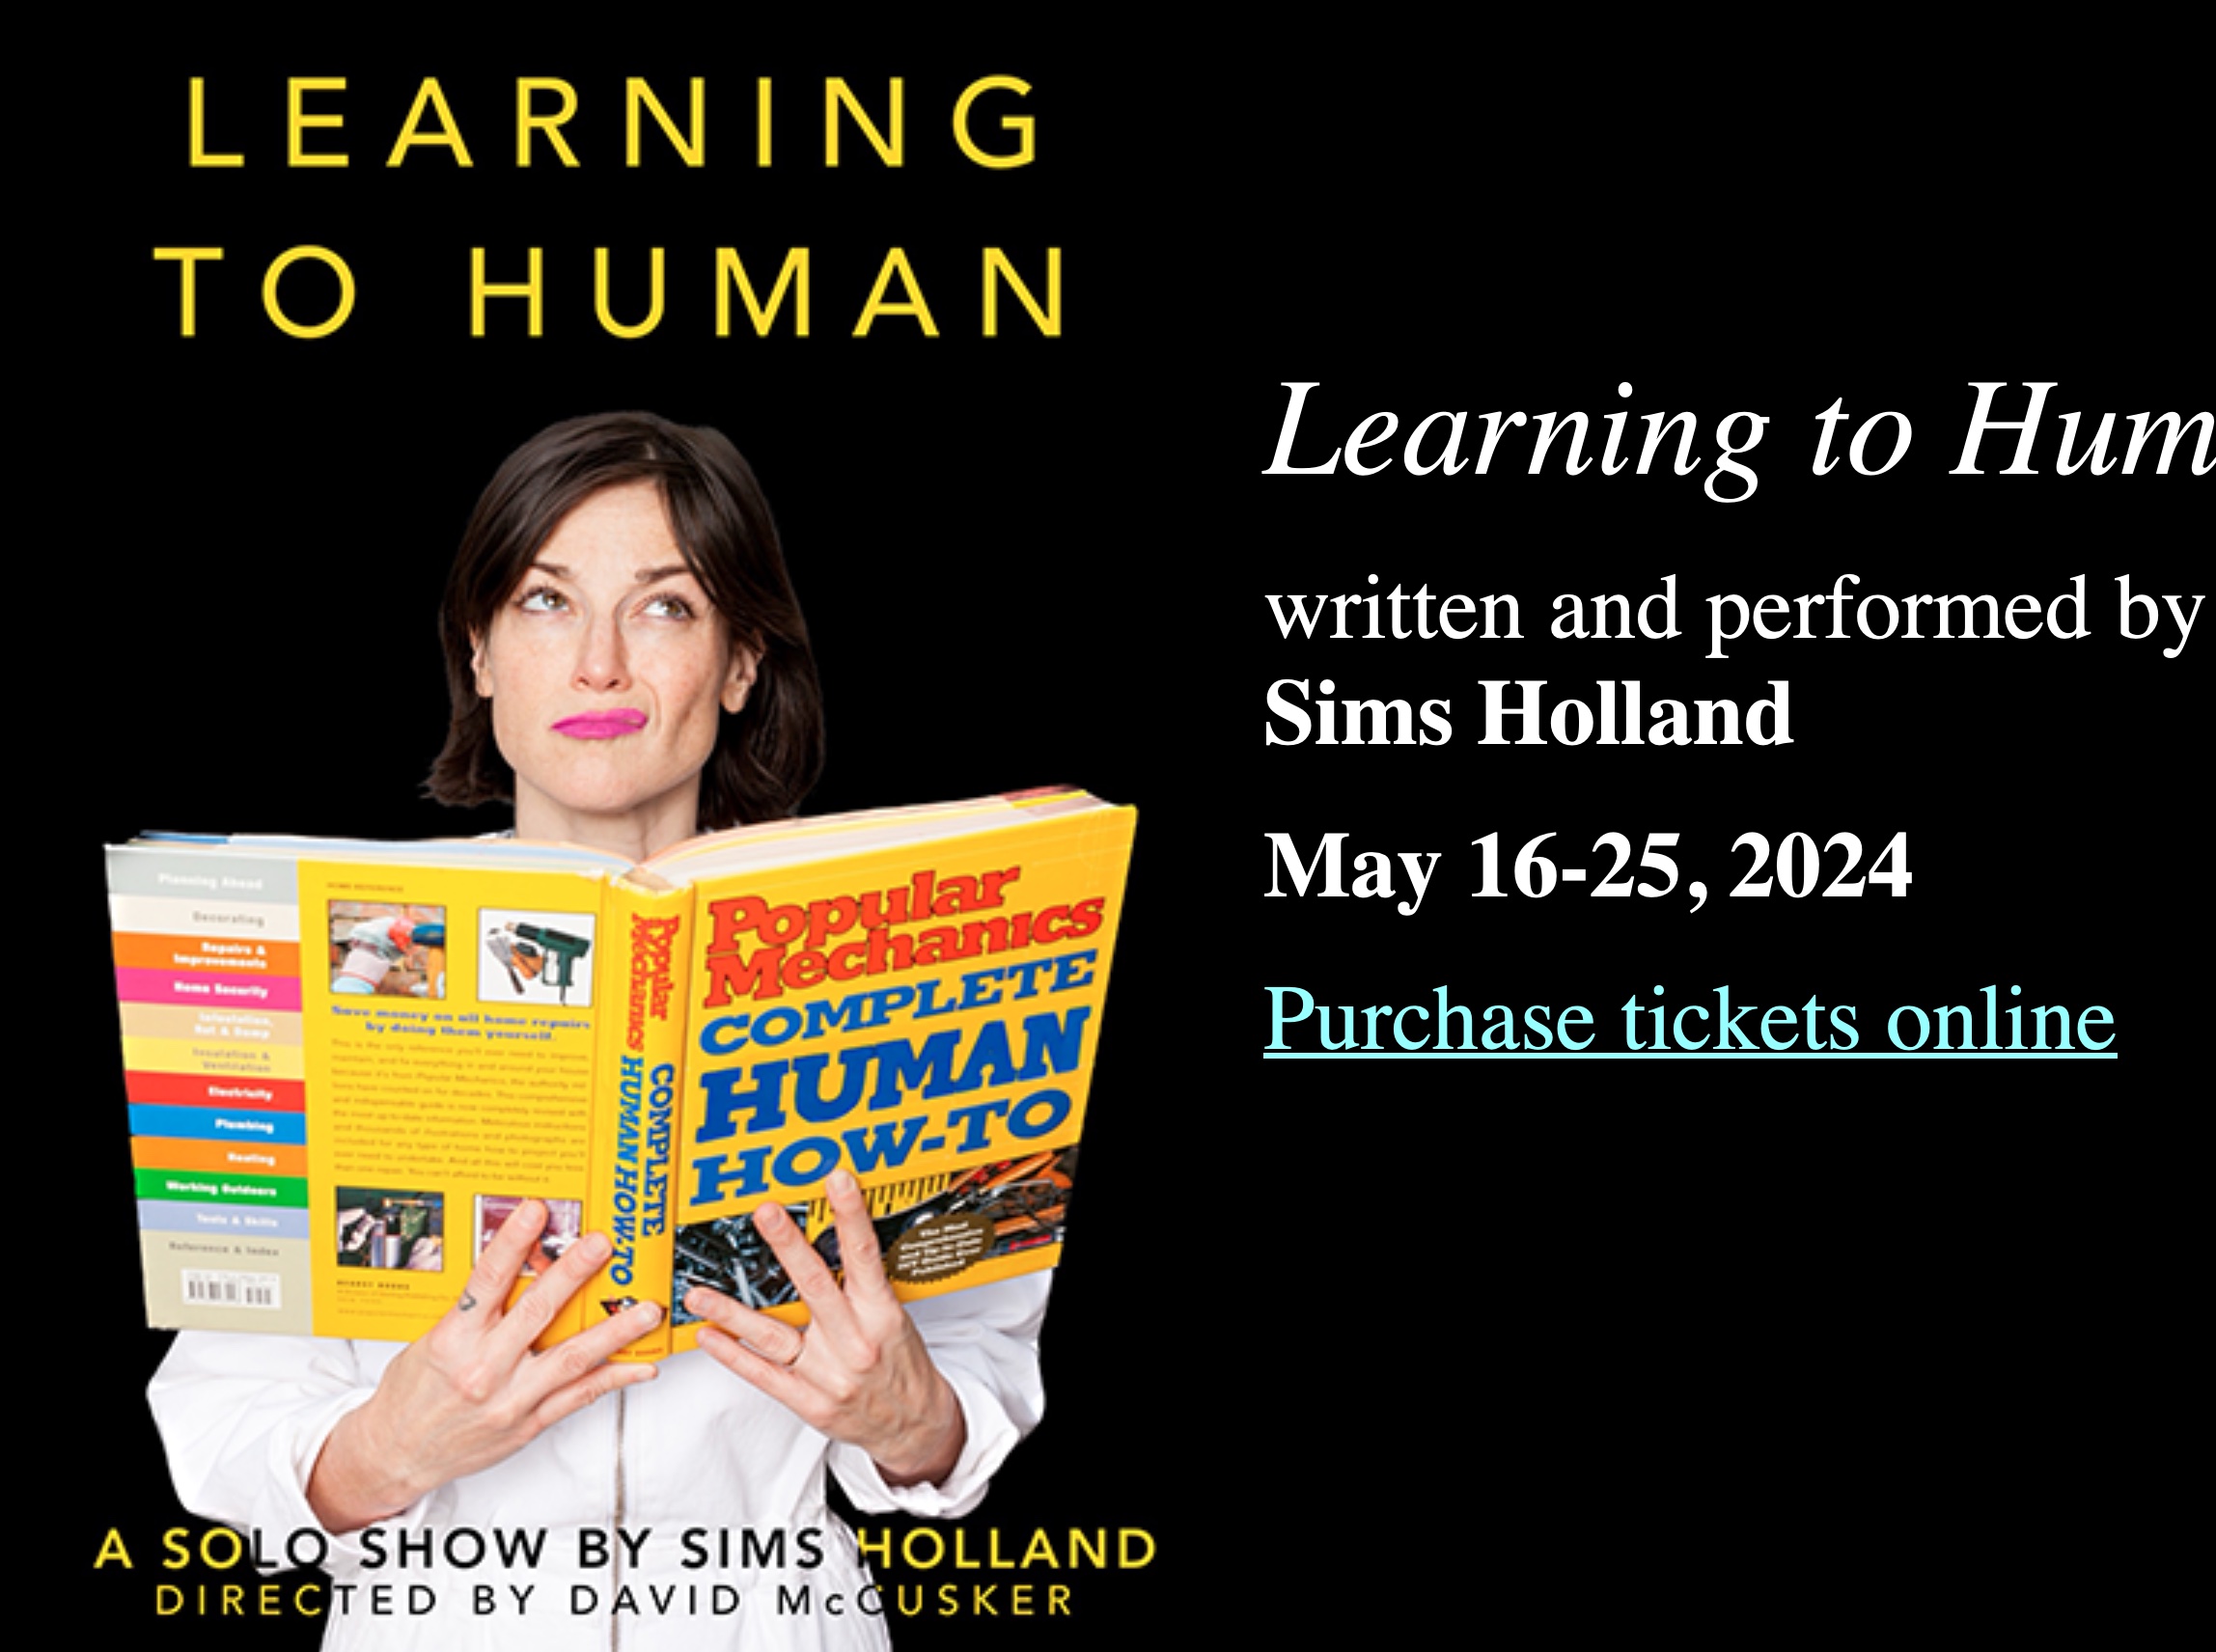 Learning to Humann by Sims Holland